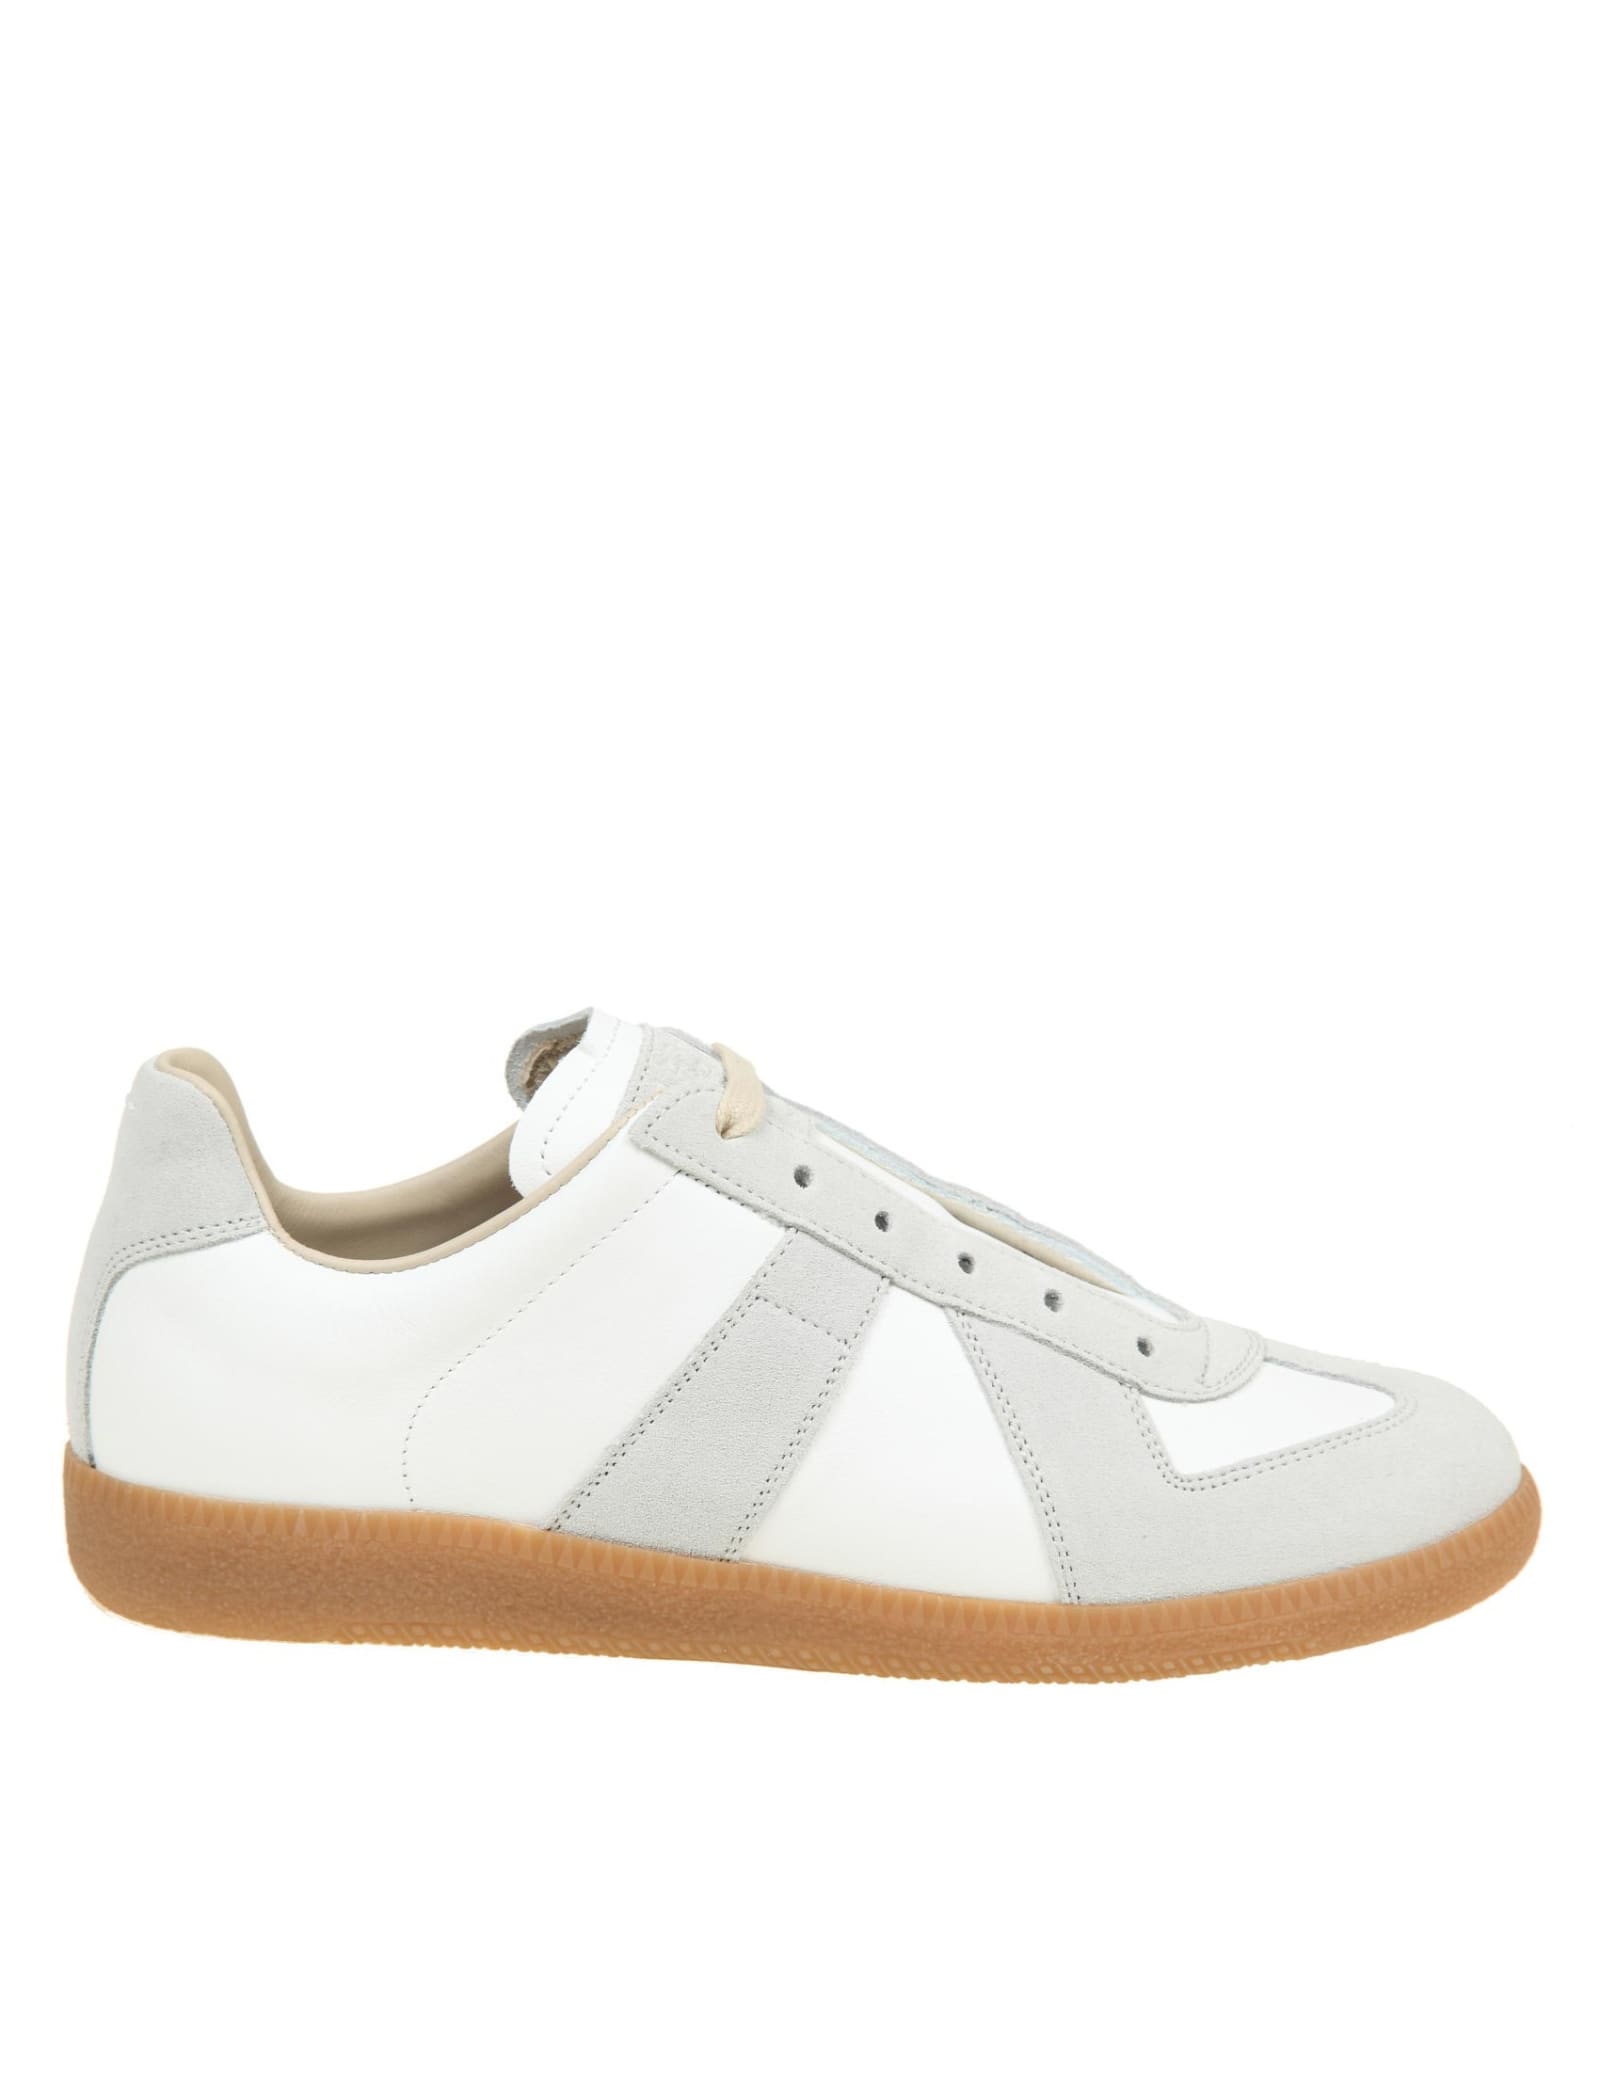 Maison Margiela Sneakers Replica In Leather And Suede